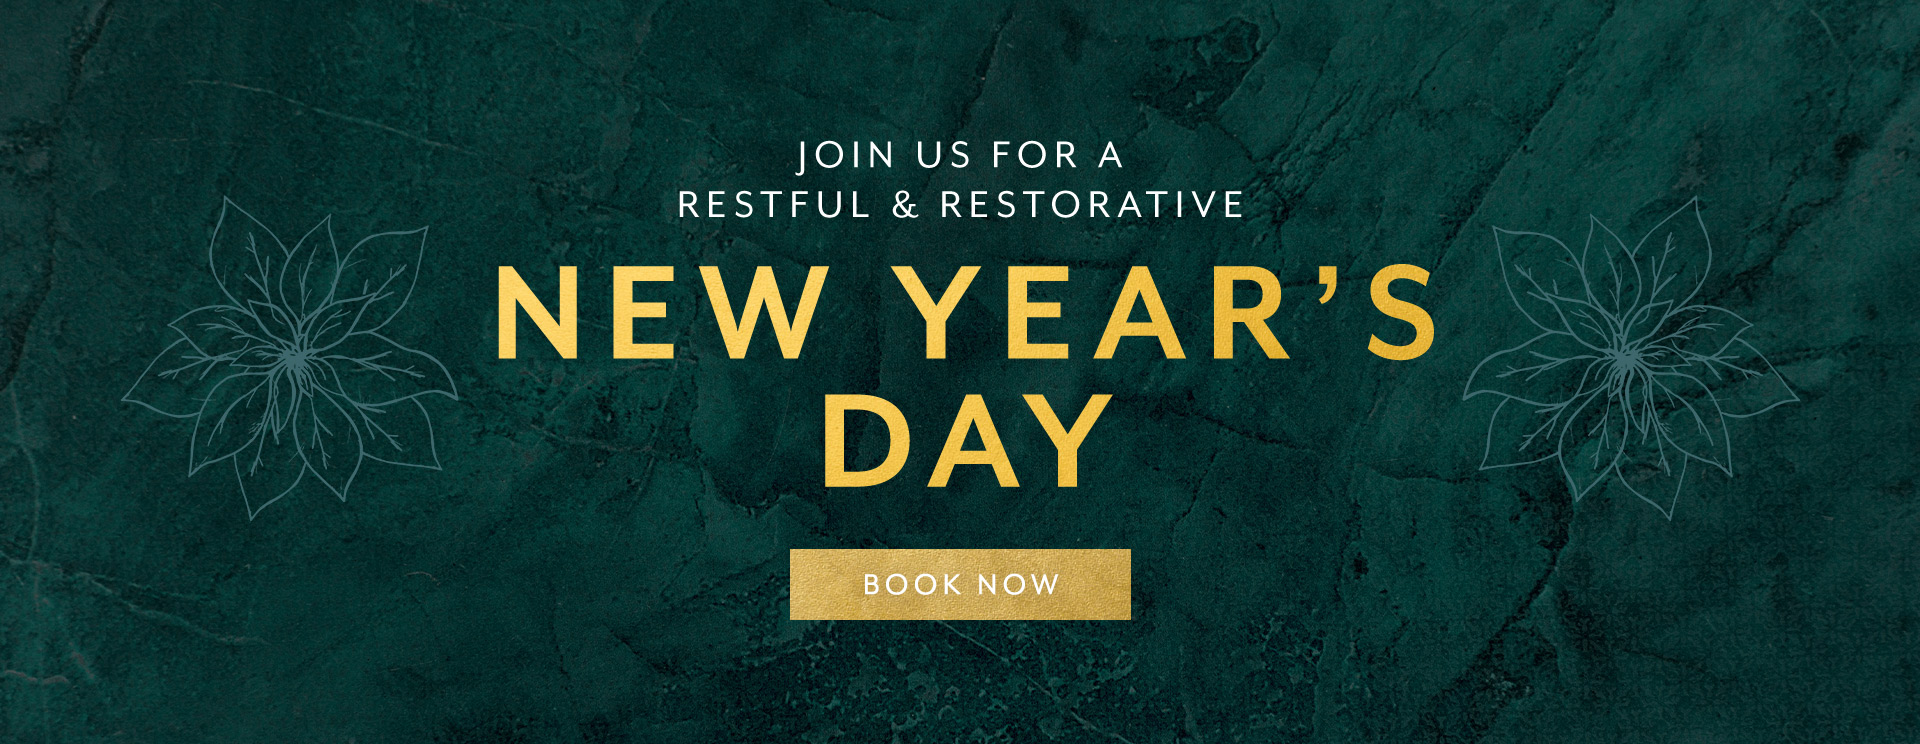 New Year's Day at The Horse & Groom